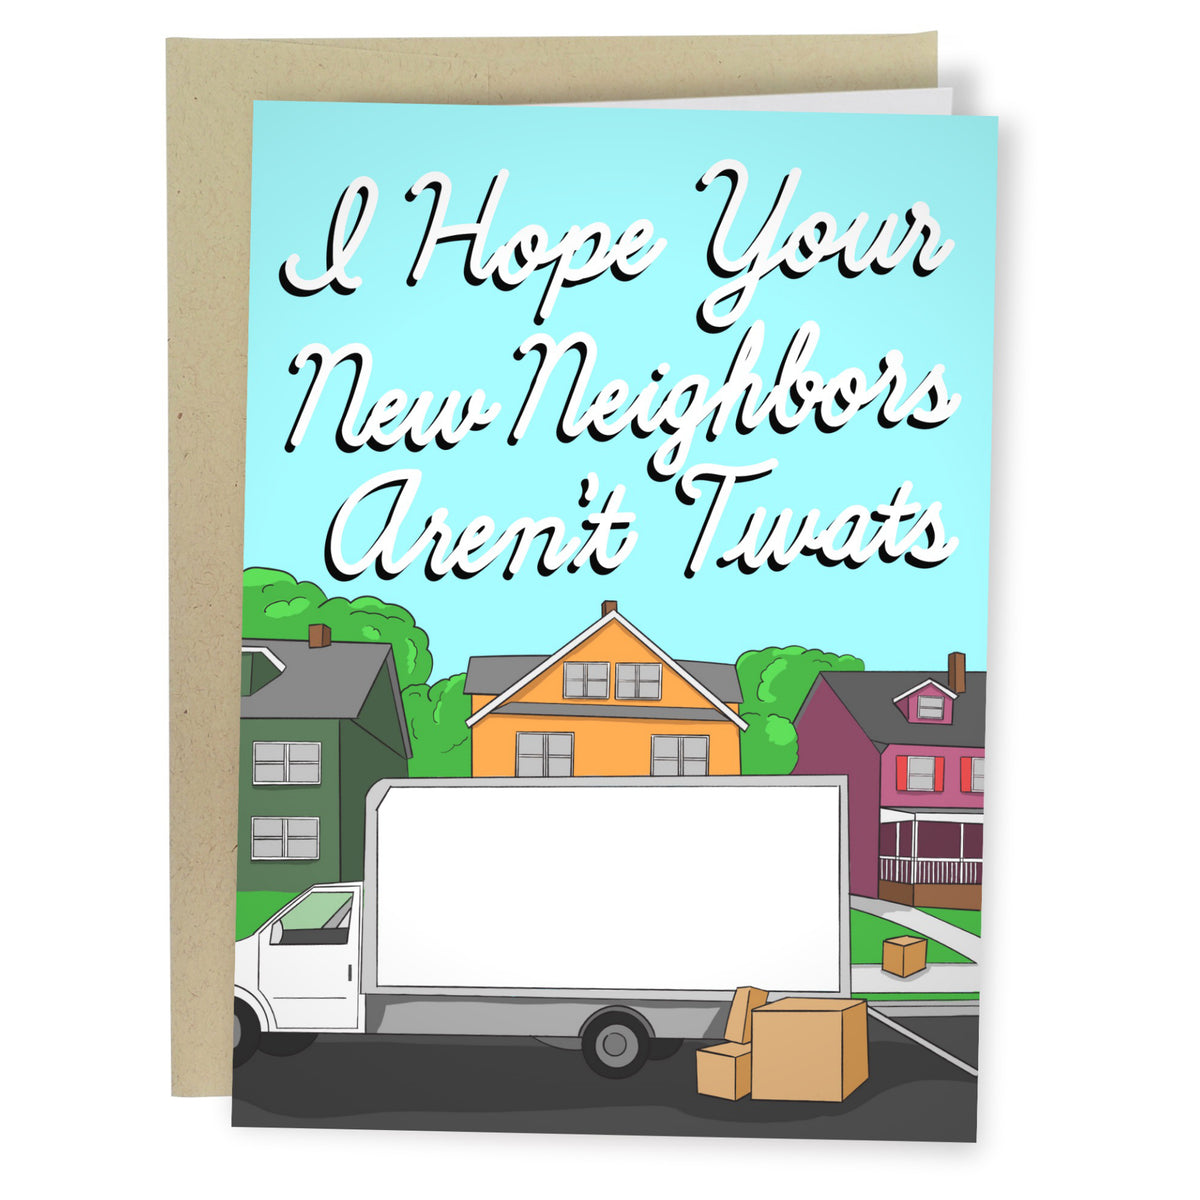 New Neighbours Arent Twats Card Sleazy Greetings Outer Layer 